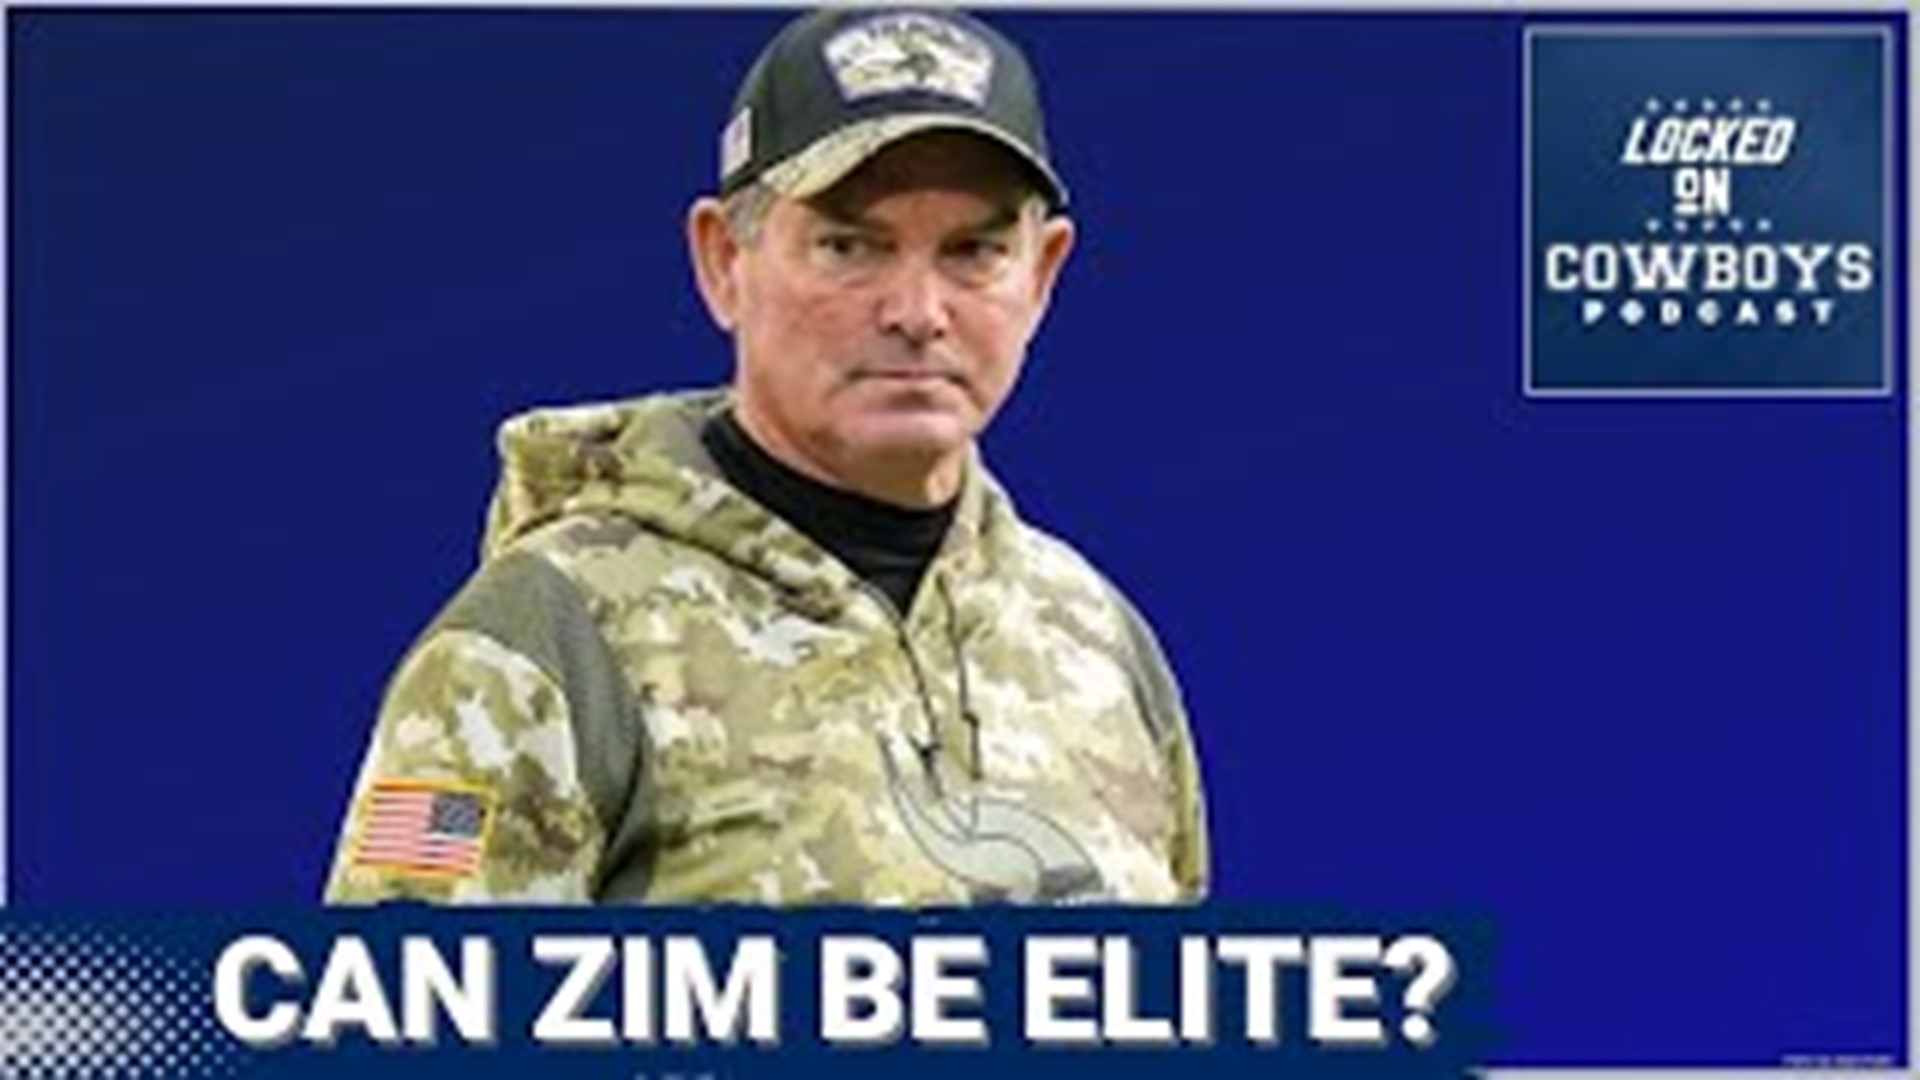 The Dallas Cowboys have officially hired Mike Zimmer to be their new defensive coordinator. Can he be an elite DC for the Cowboys?